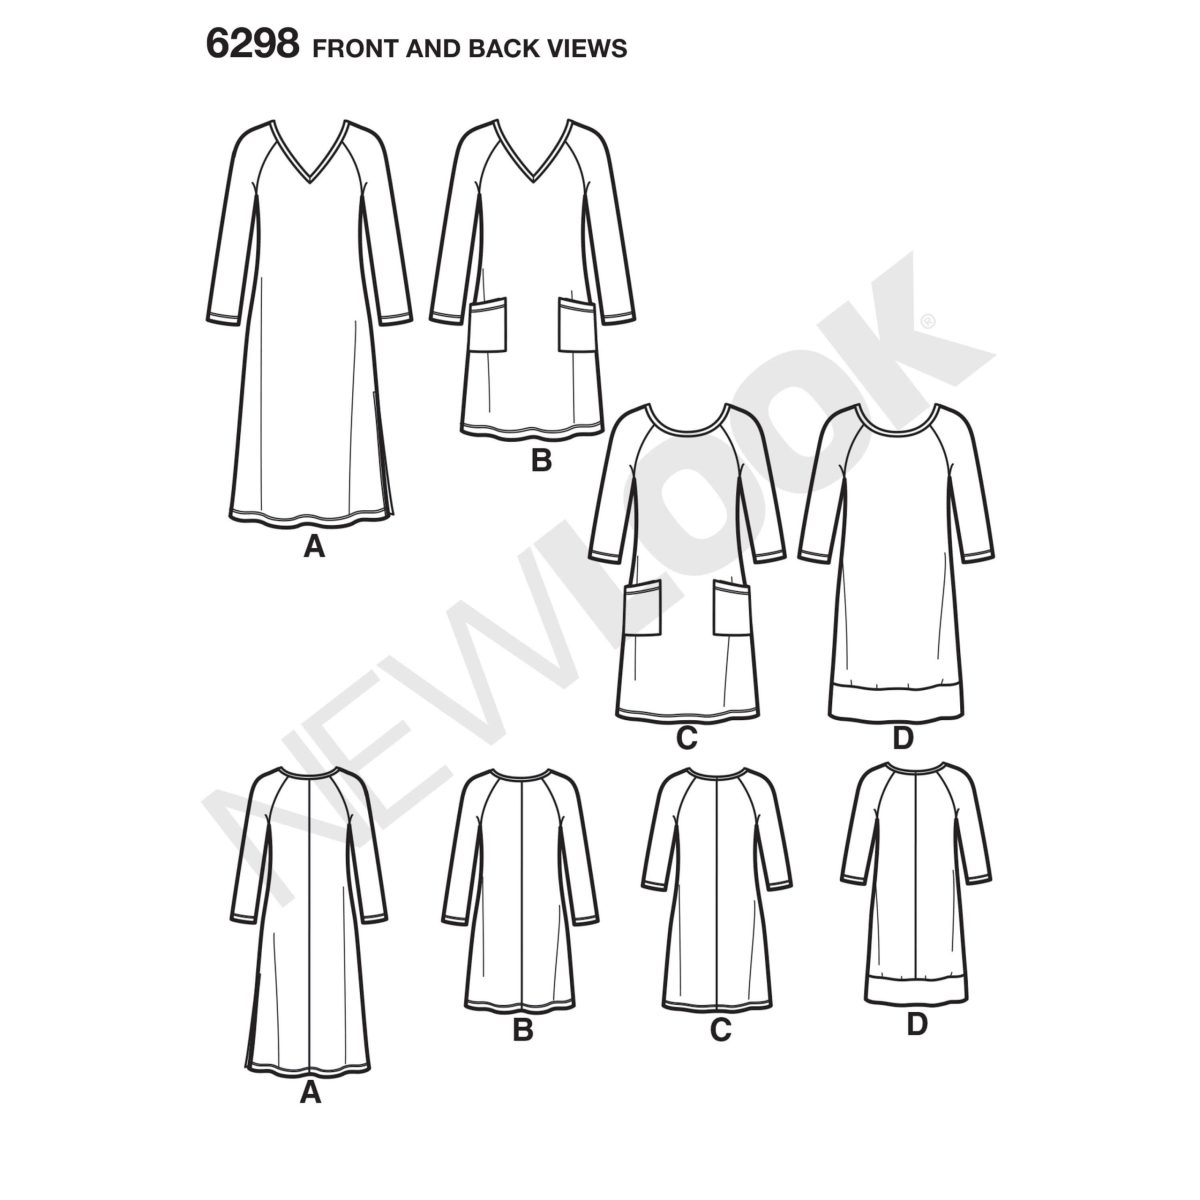 New Look Sewing Pattern N6298 Misses' Knit Dress with Neckline & Length Variations